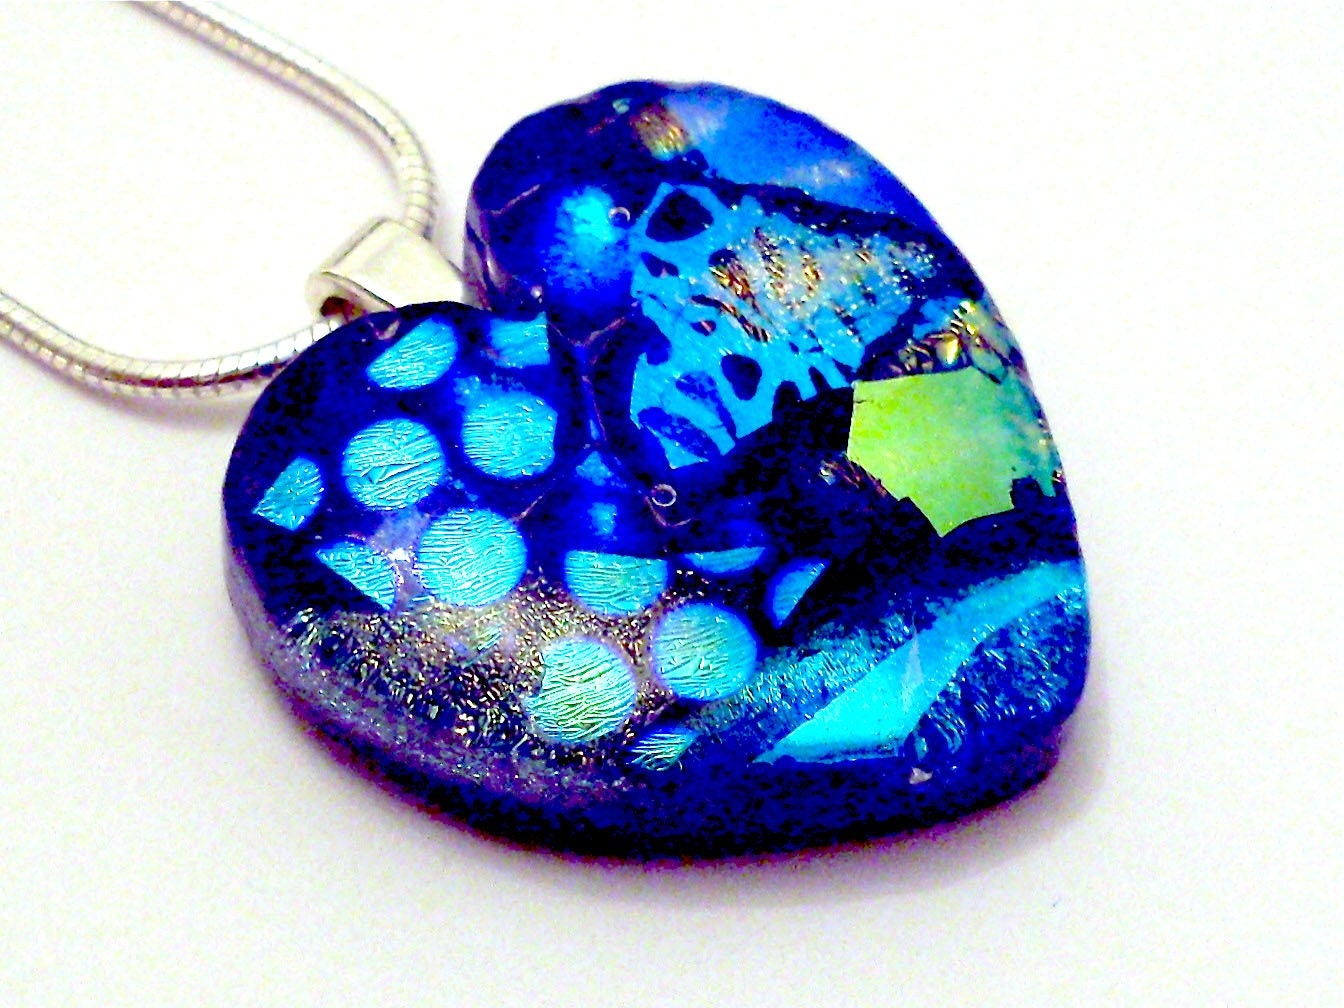 FUSED GLASS PENDANTS BY BOTTICELLI. Fused glass has always captivated me.